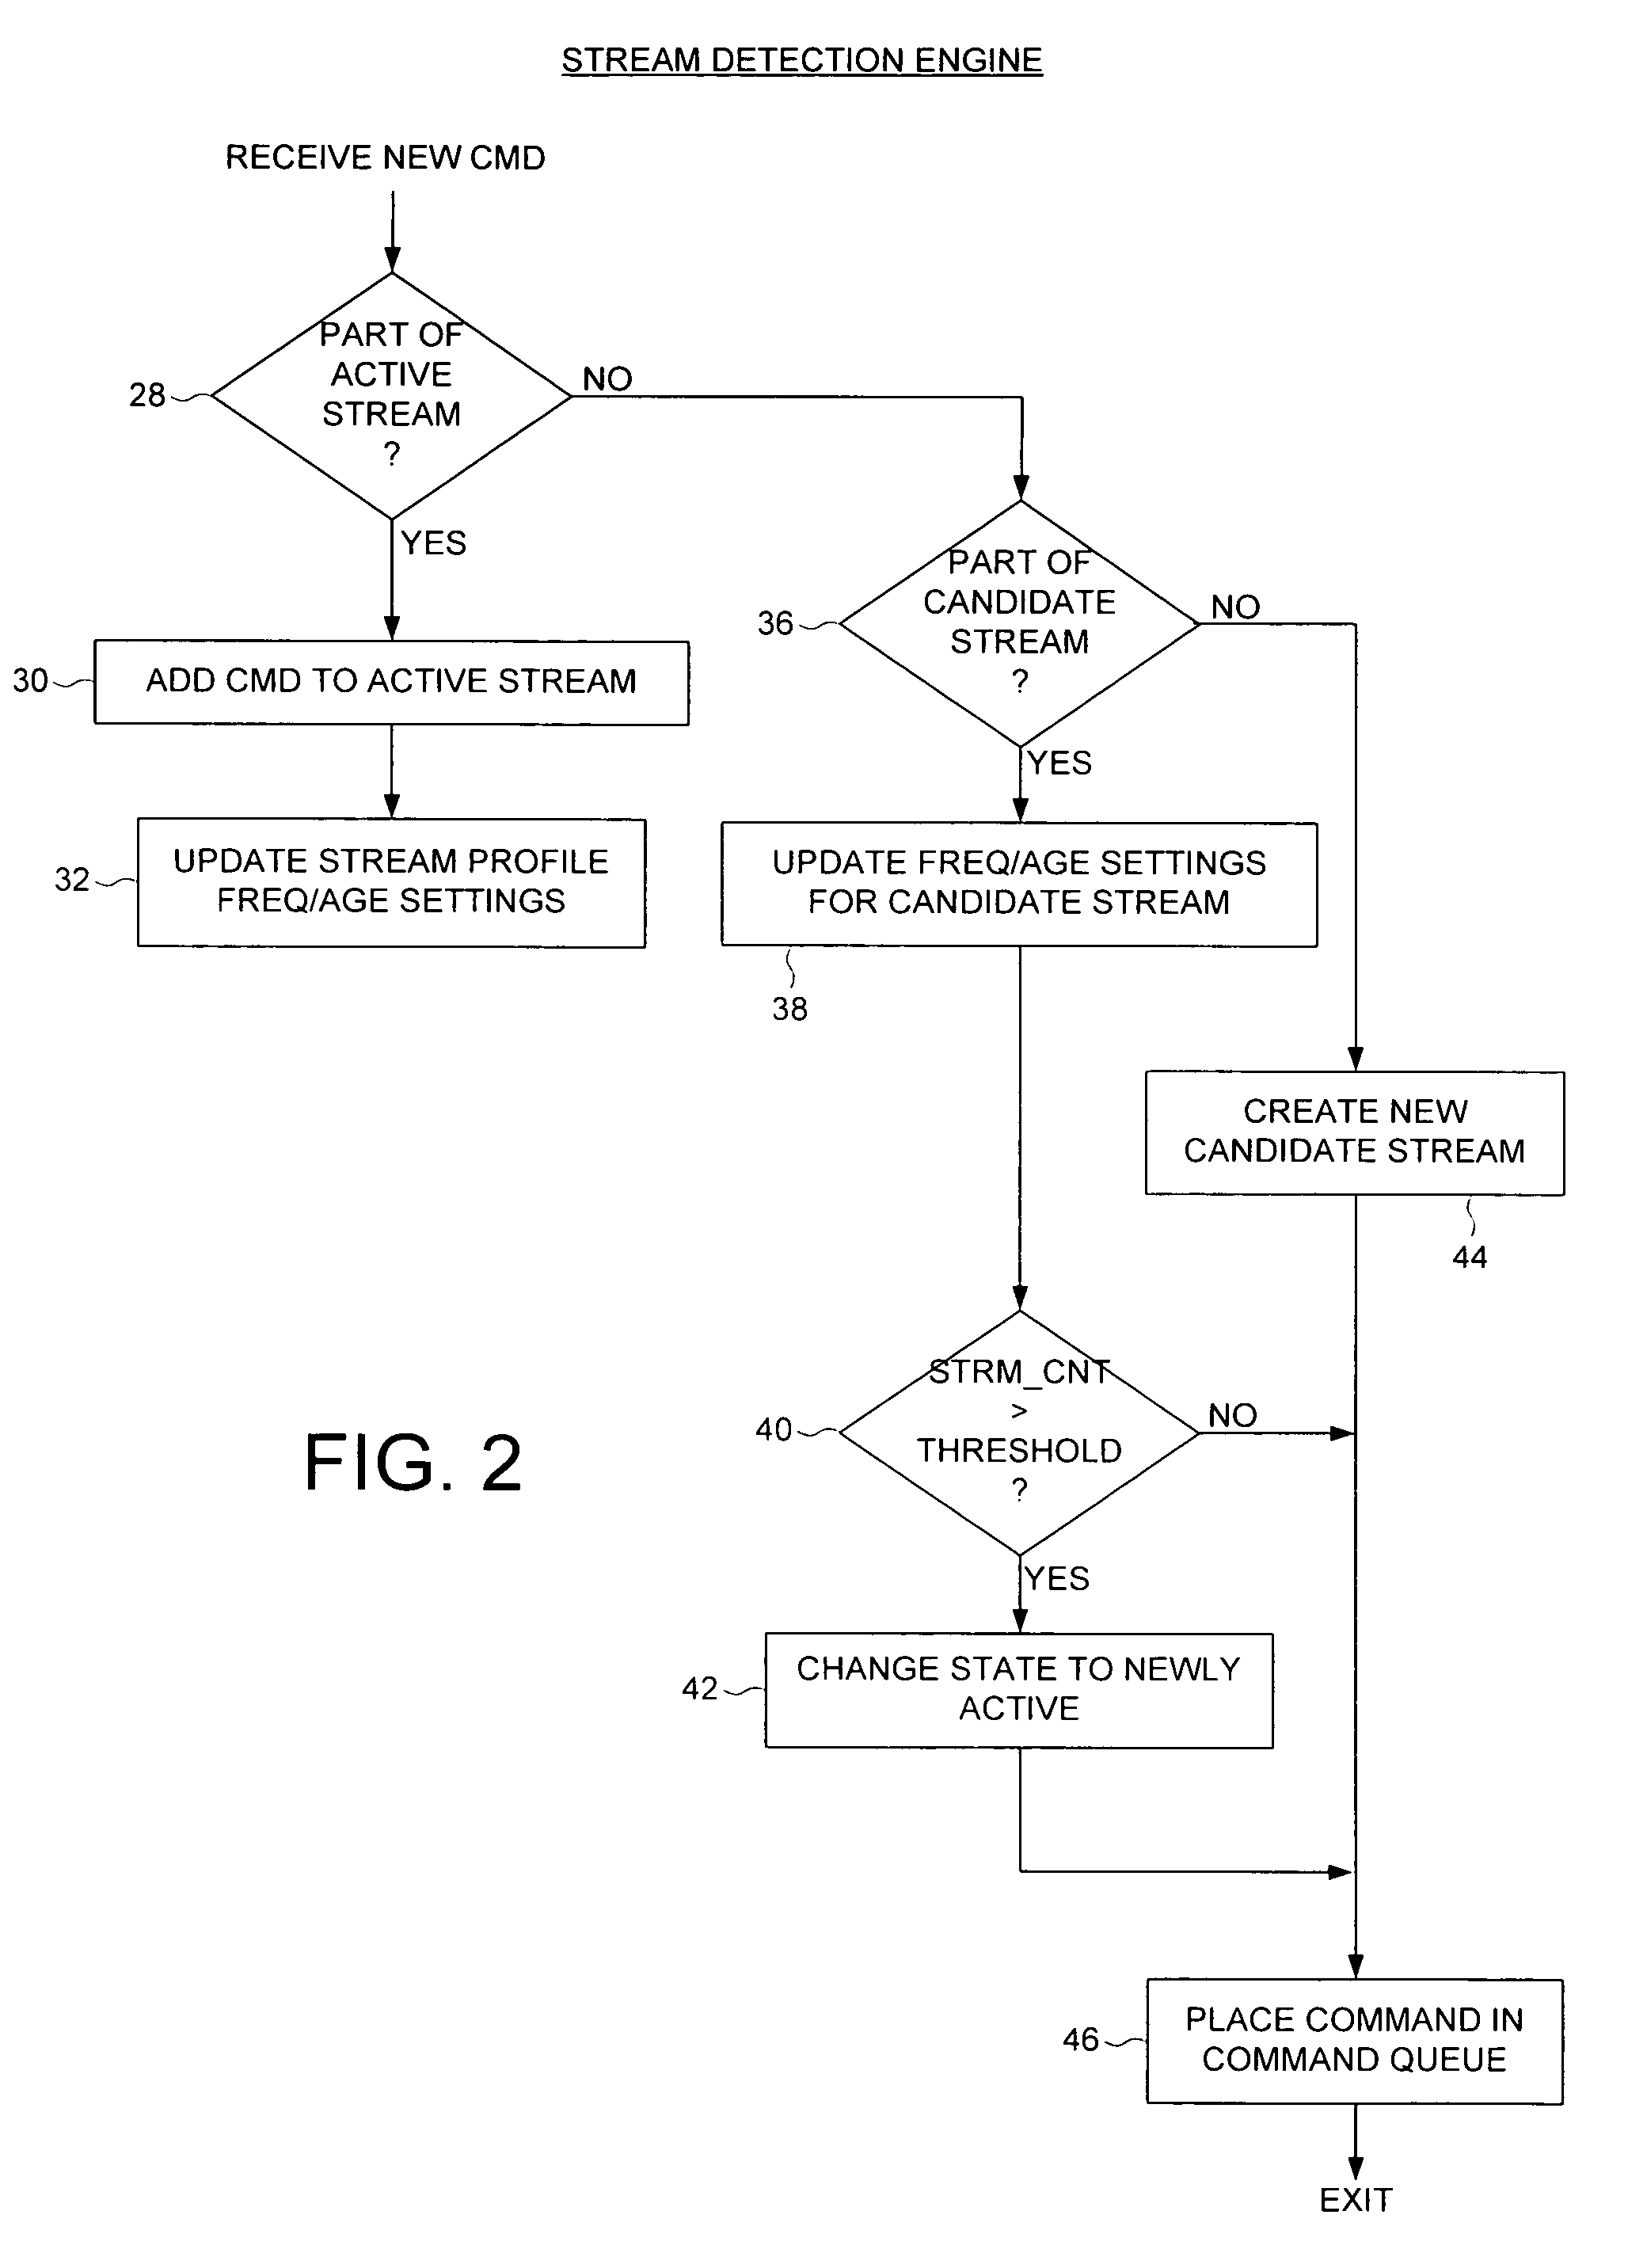 Disk drive employing stream detection engine to enhance cache management policy